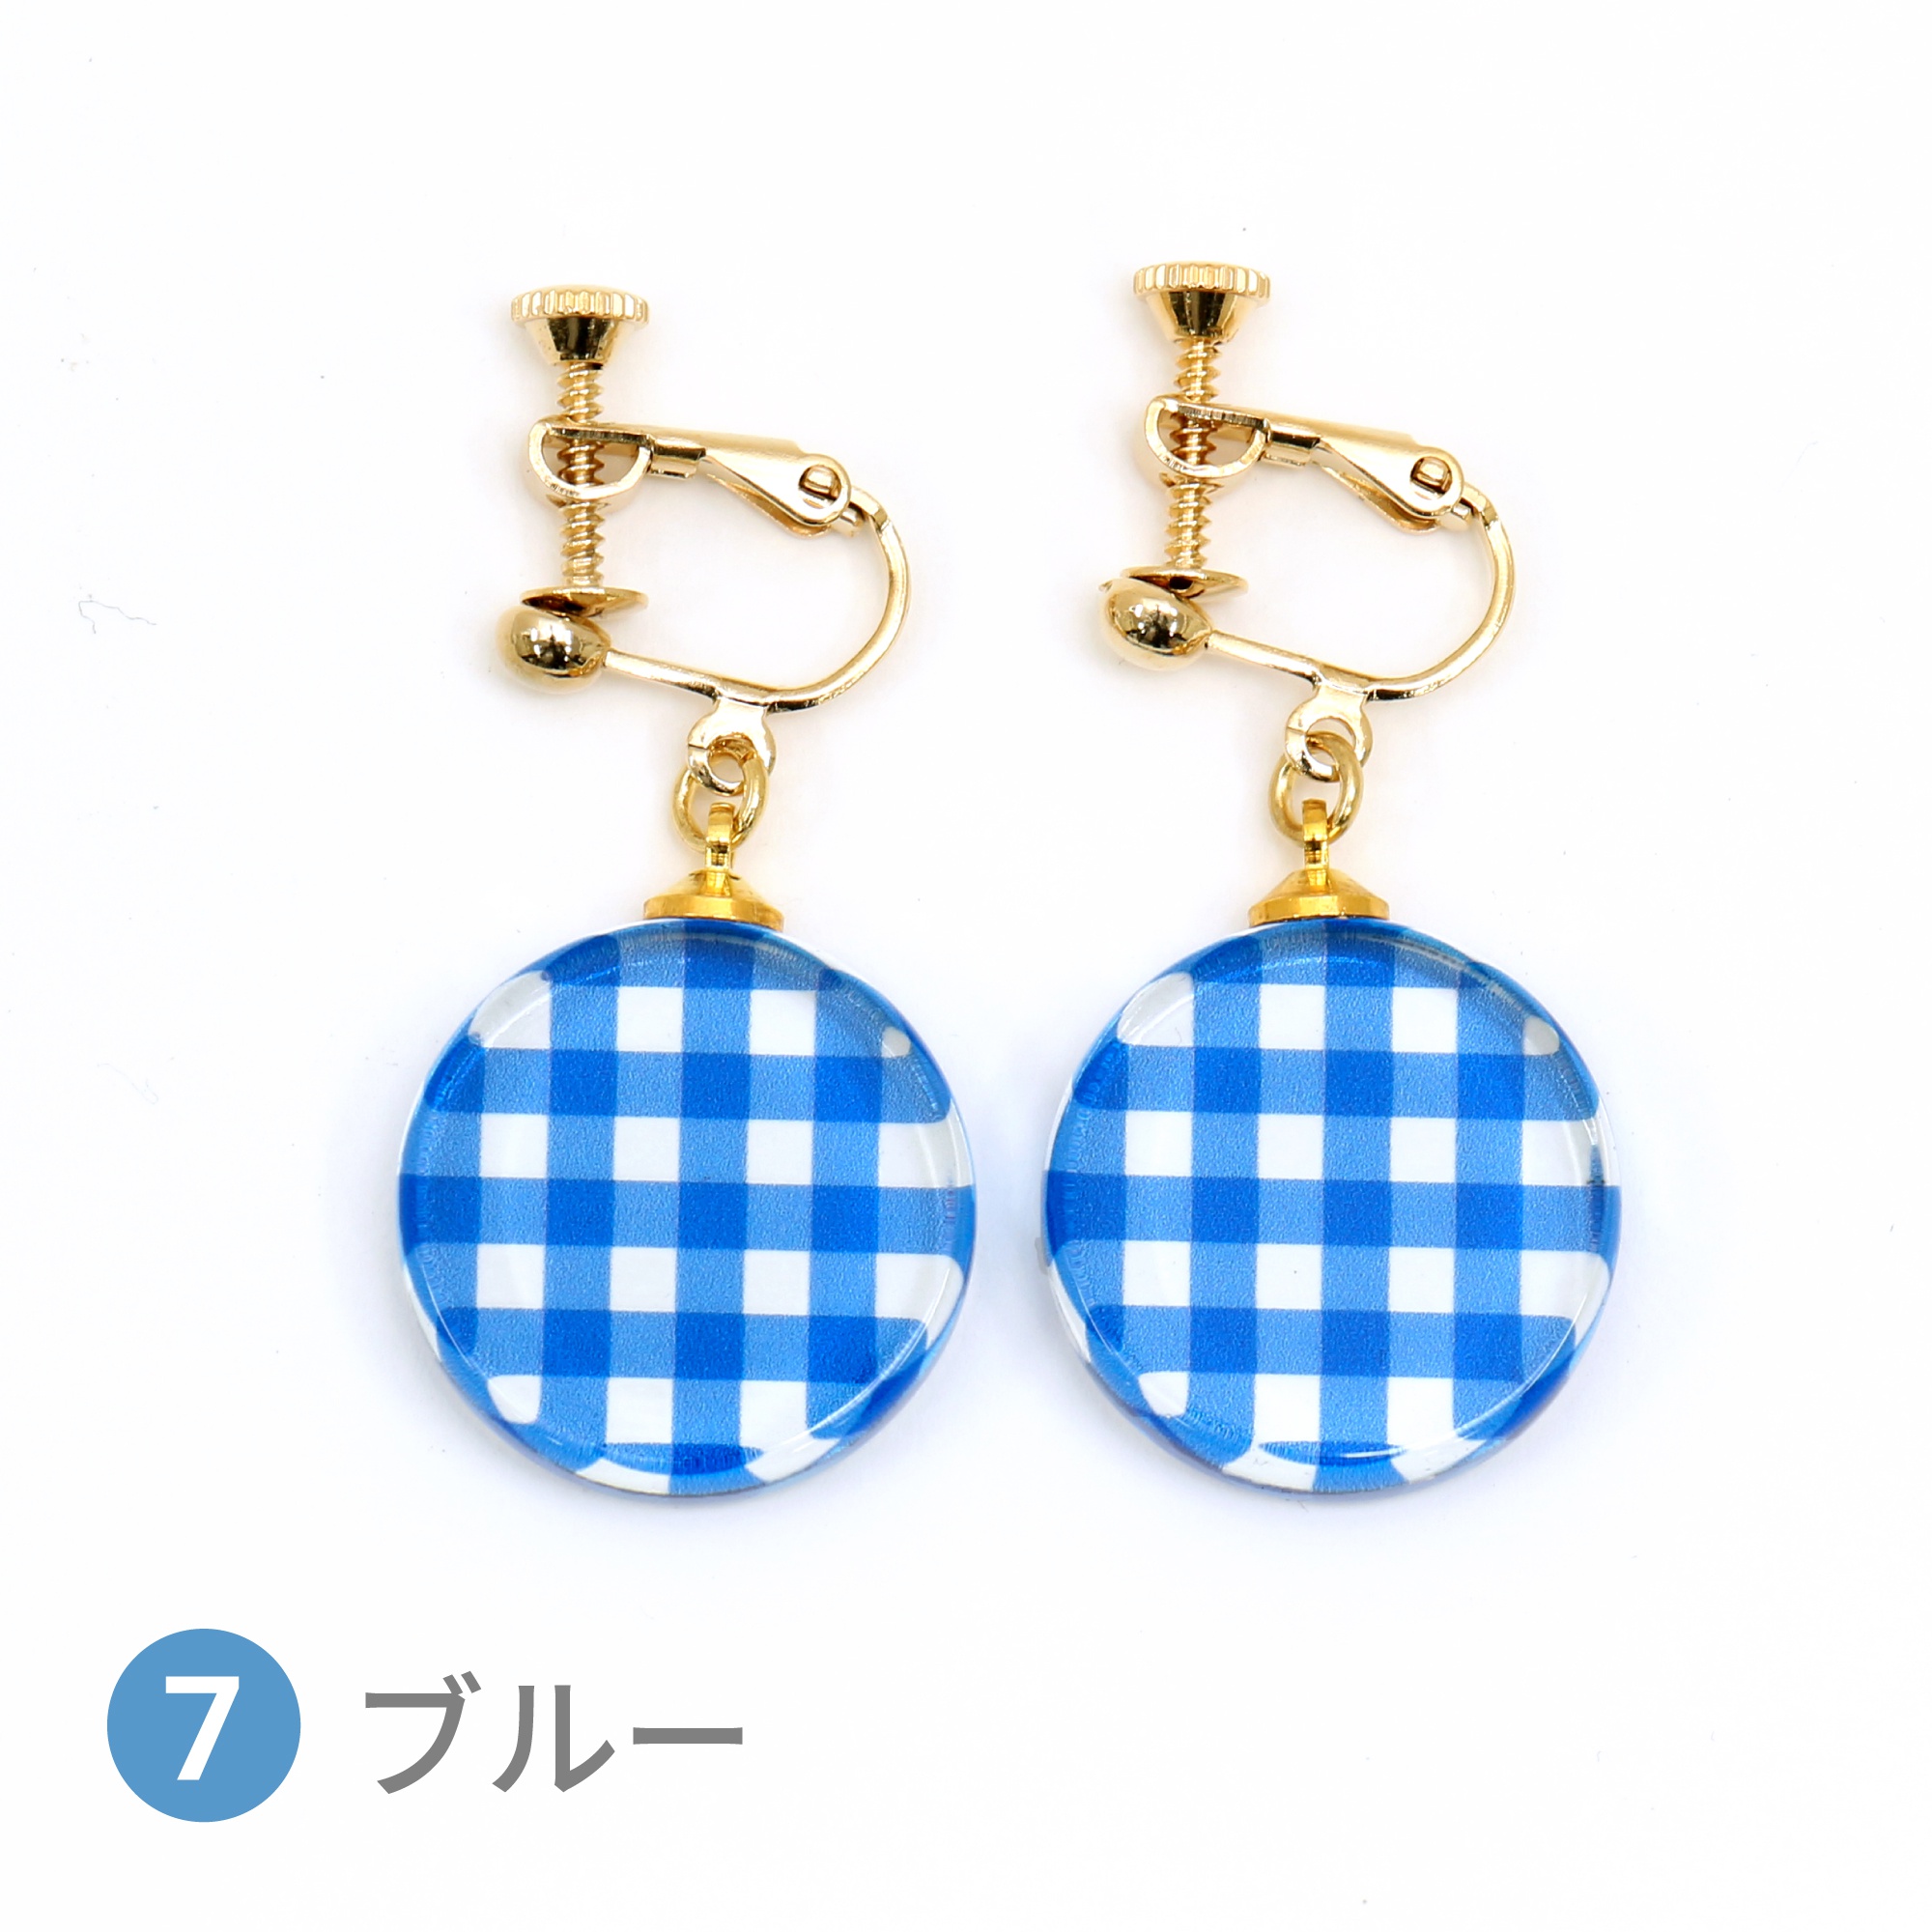 Glass accessories Earring GINGHAM CHECK blue round shape